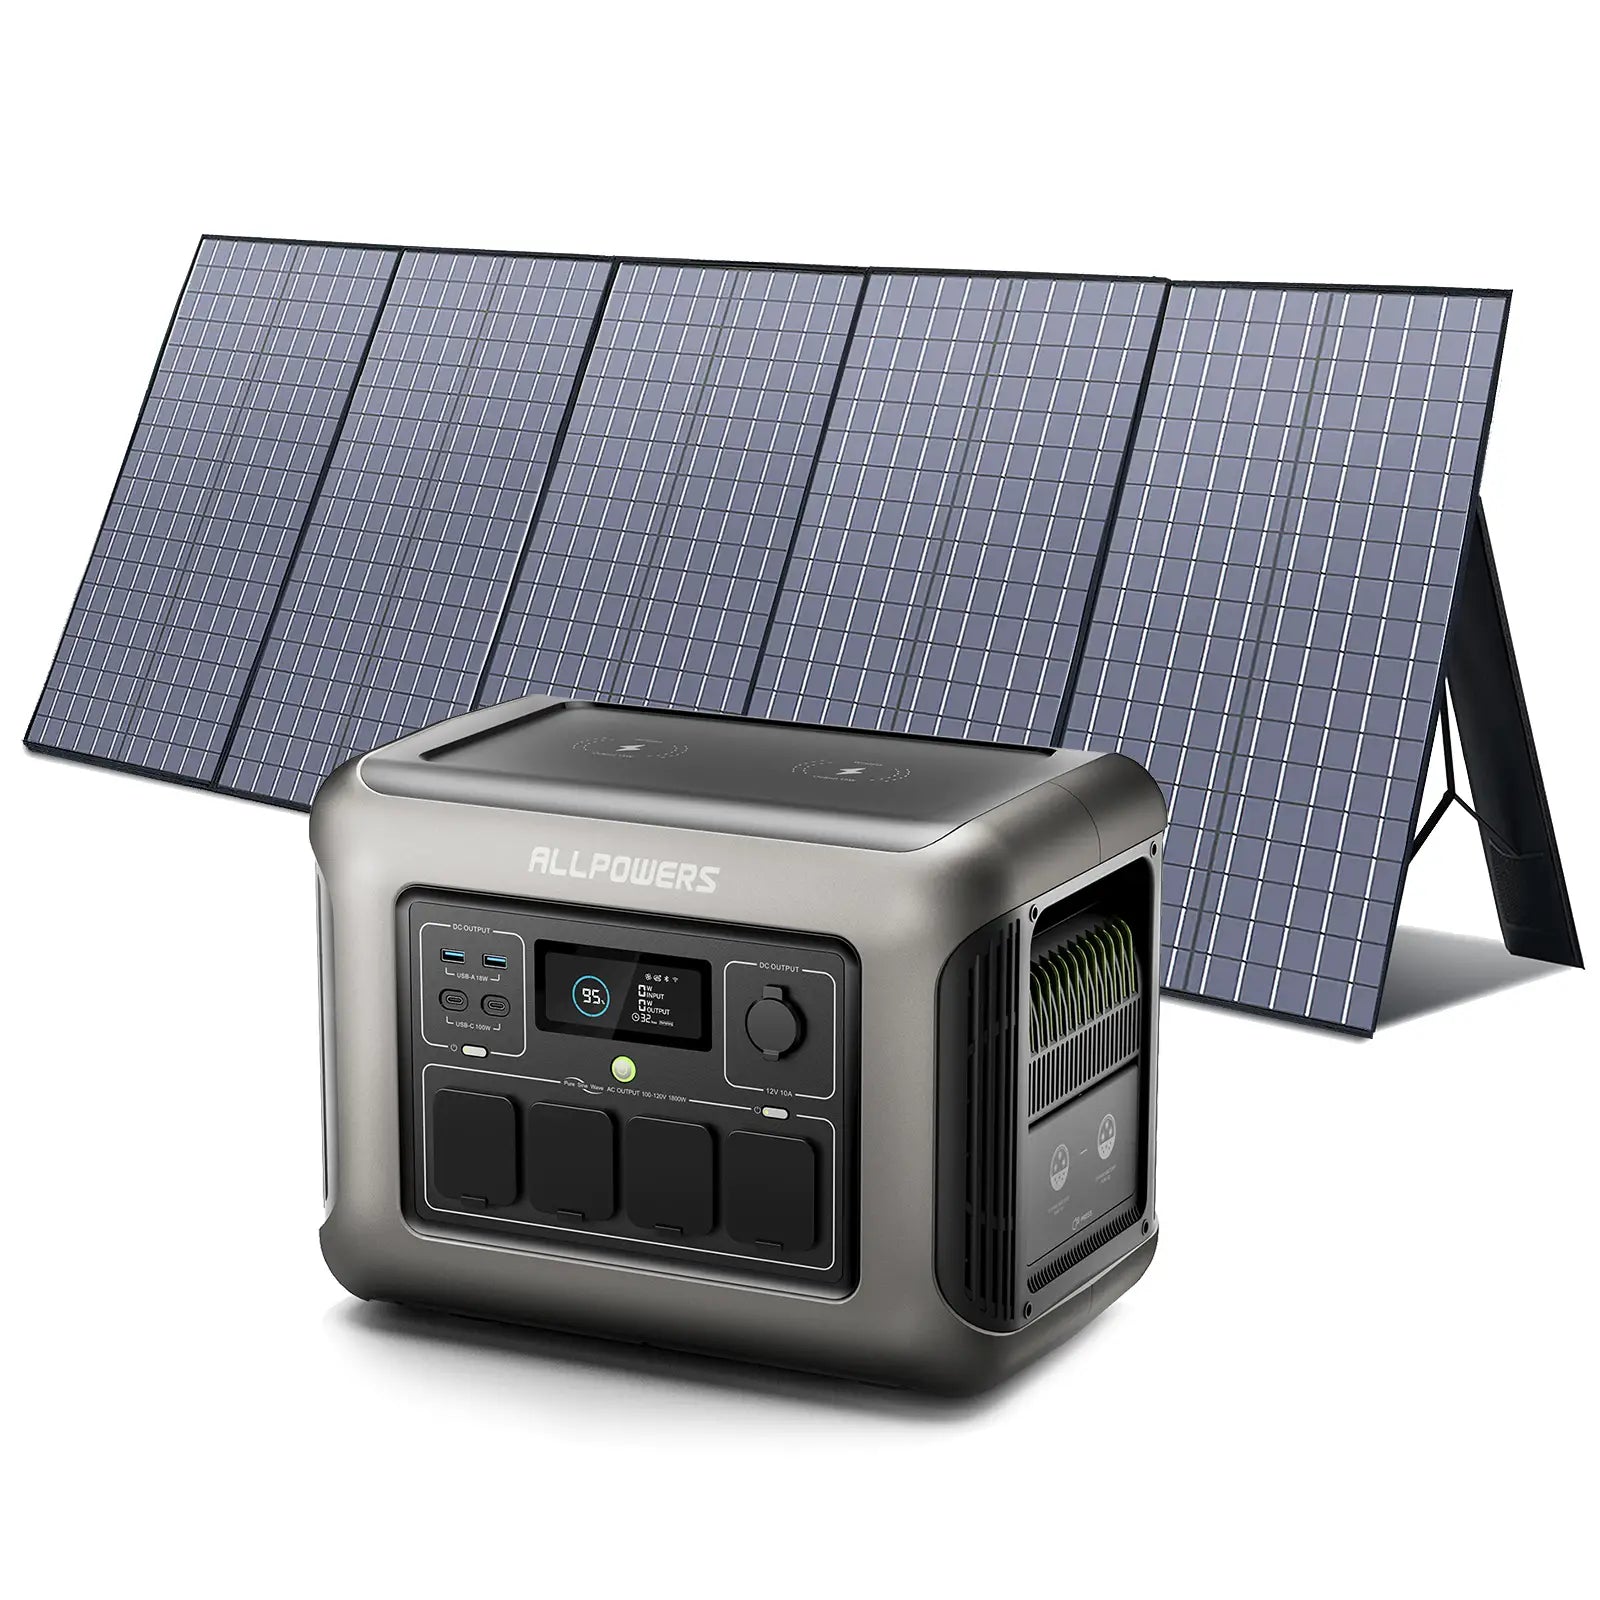 ALLPOWERS R1500 Portable Home Backup Power Station 1800W 1152Wh LiFeP04 Battery(R1500 + SP037 400W Solar Panel)